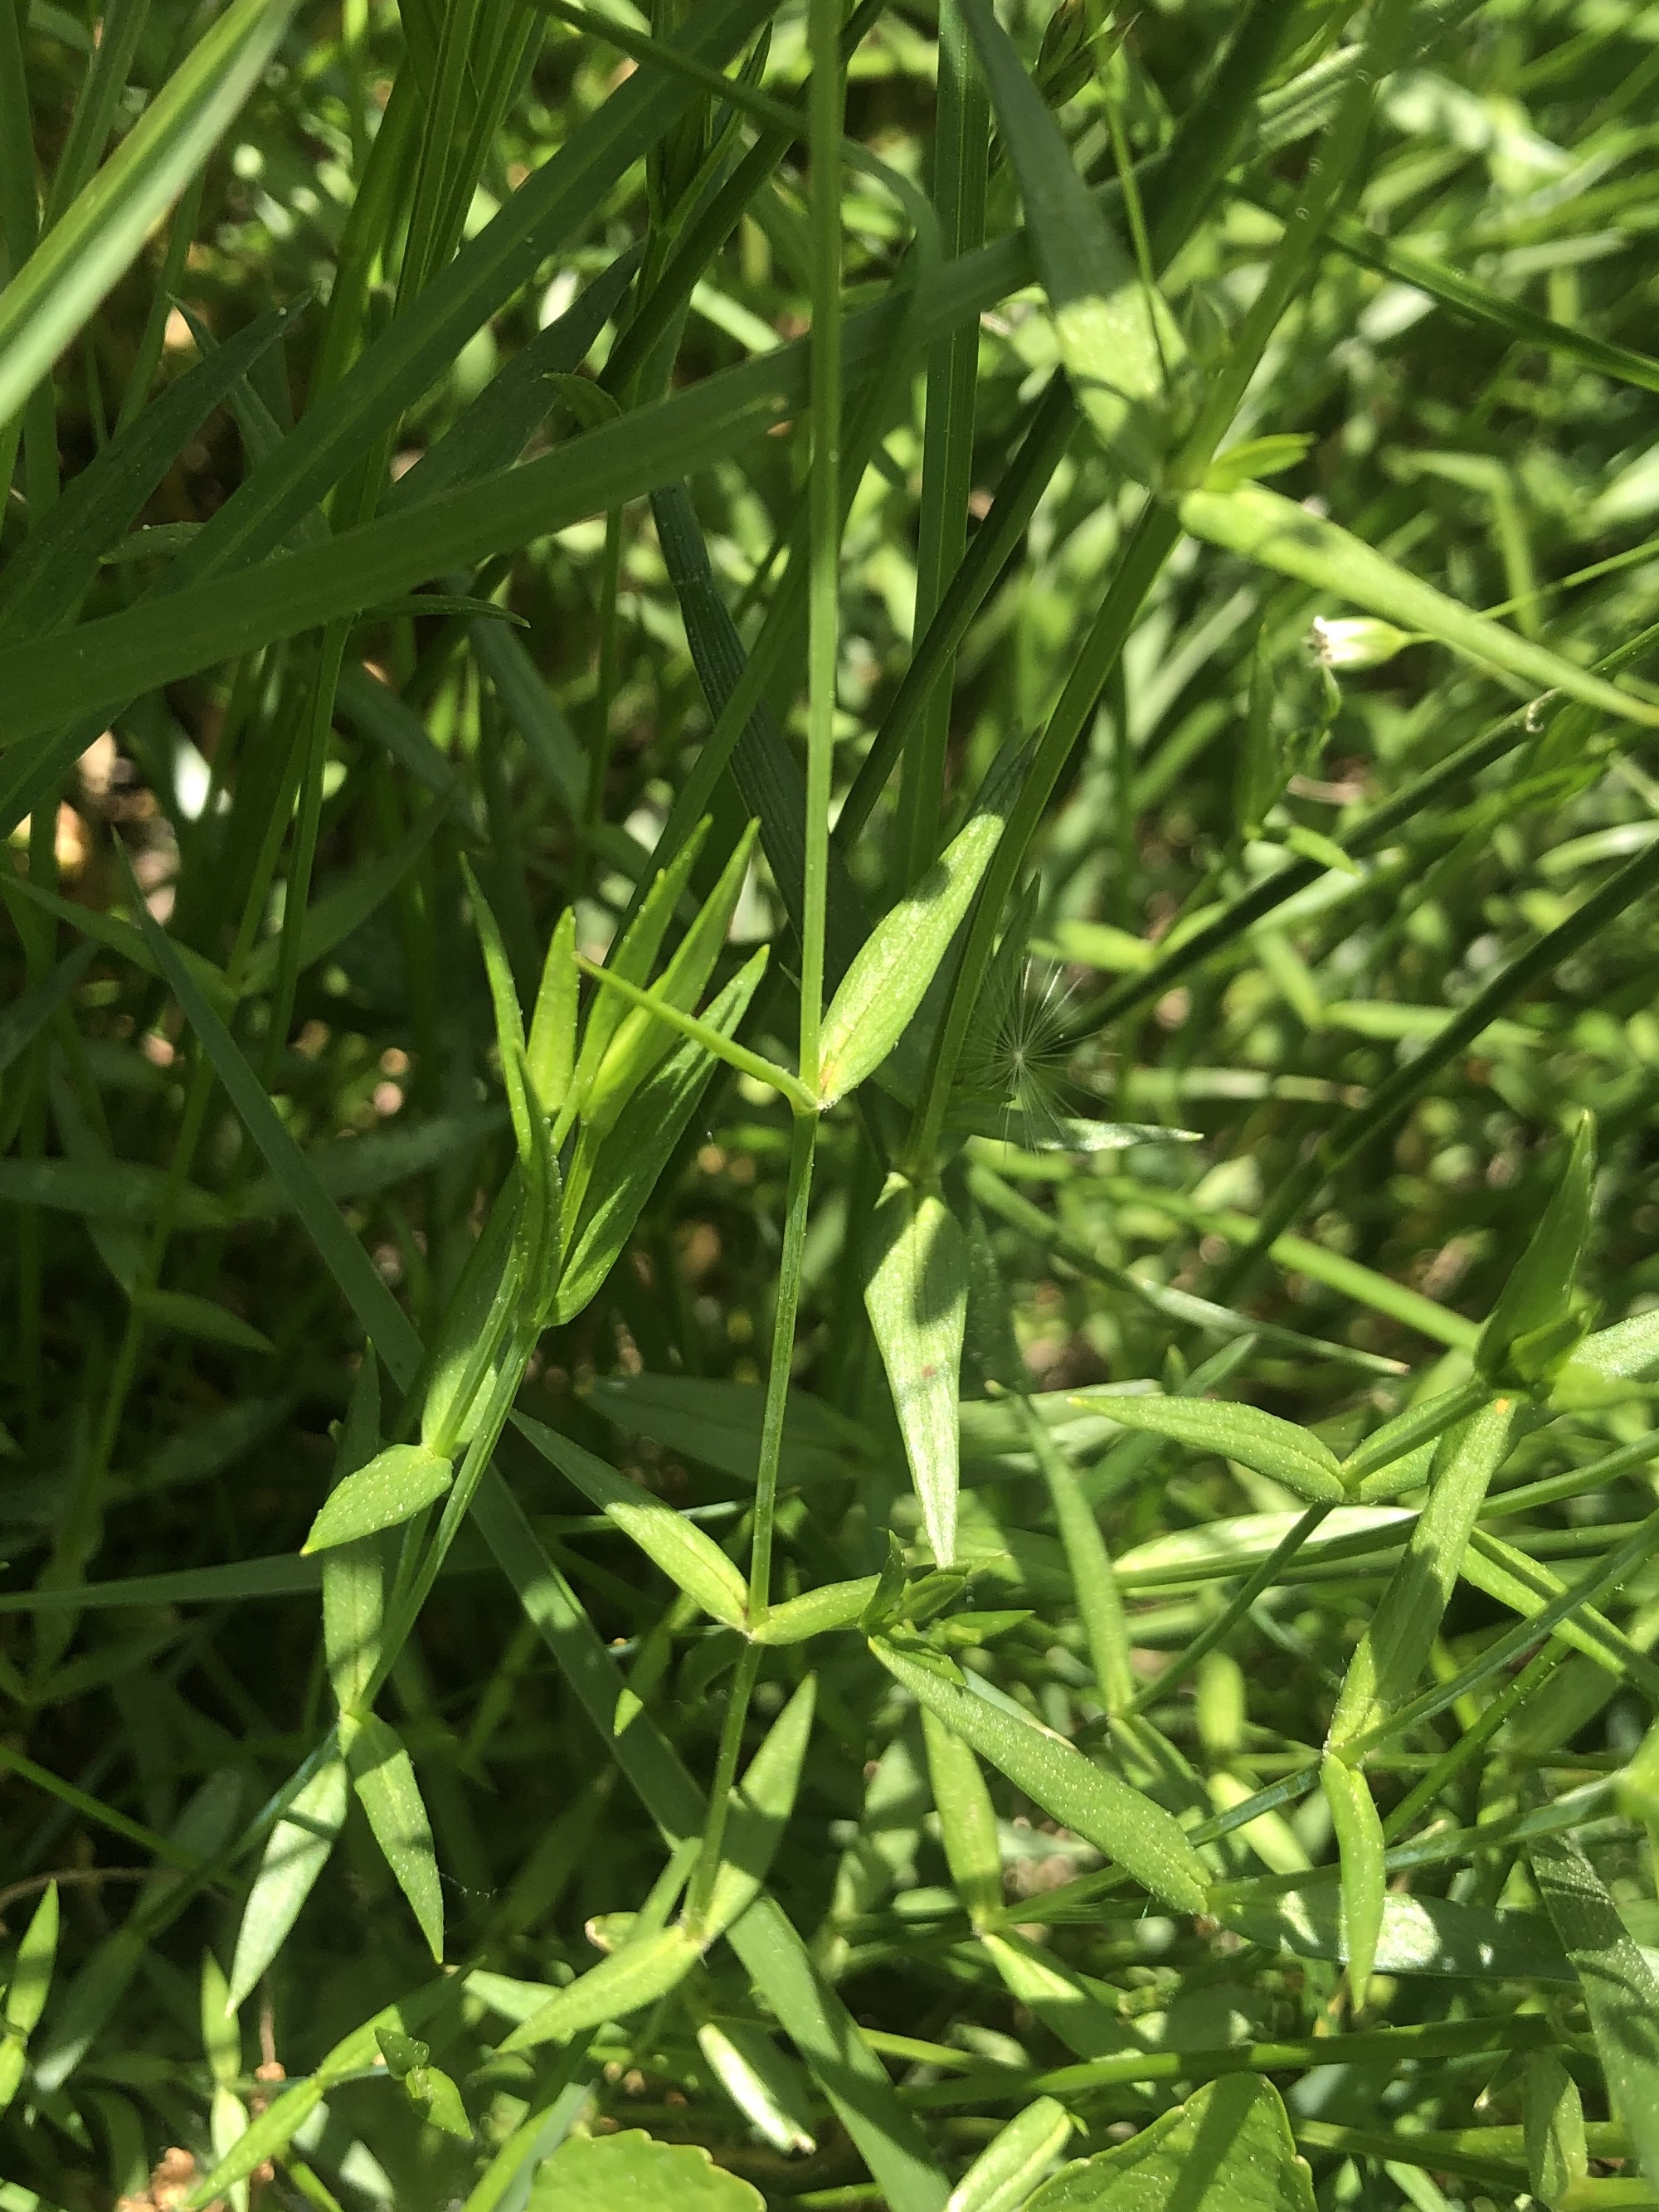 Common Stitchwort stems and leaves in a grassy clearing along the bike path between Odana Road and Midvale Boulevard in Madison, Wisconsin on June 2, 2022.